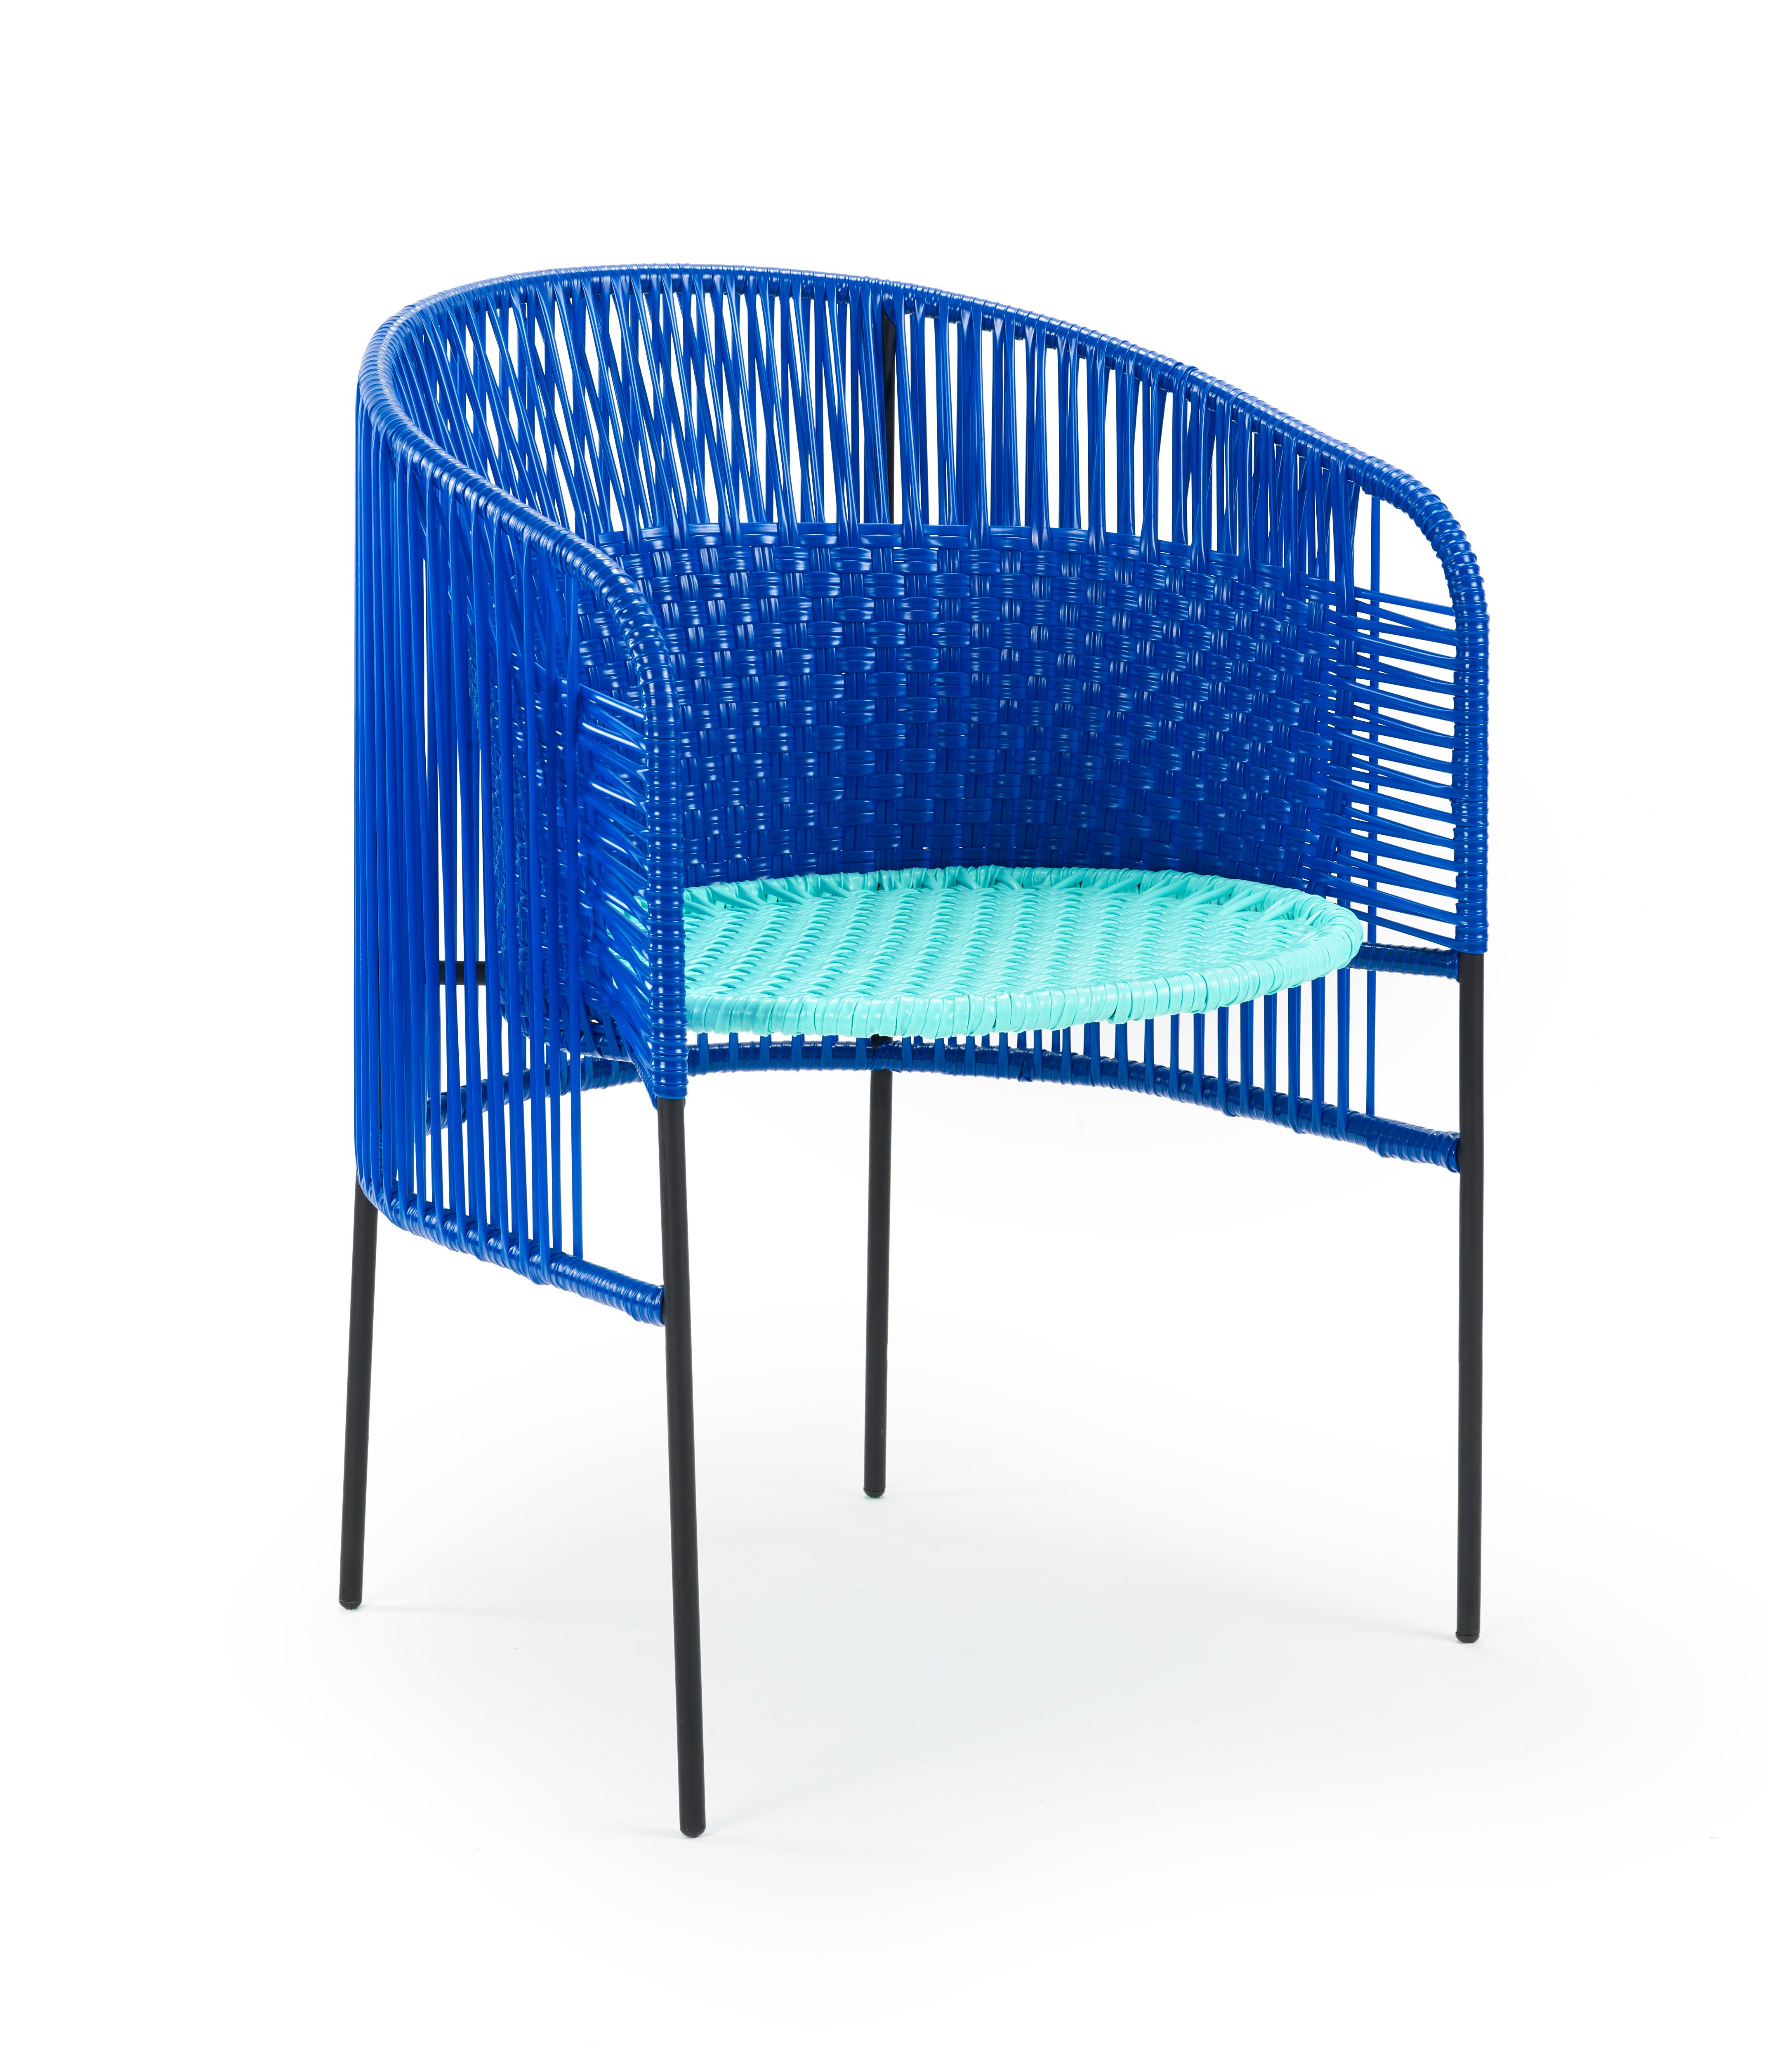 Set of 2 blue caribe dining chair by Sebastian Herkner.
Materials: Galvanized and powder-coated tubular steel. PVC strings are made from recycled plastic.
Technique: Made from recycled plastic and weaved by local craftspeople in Colombia.